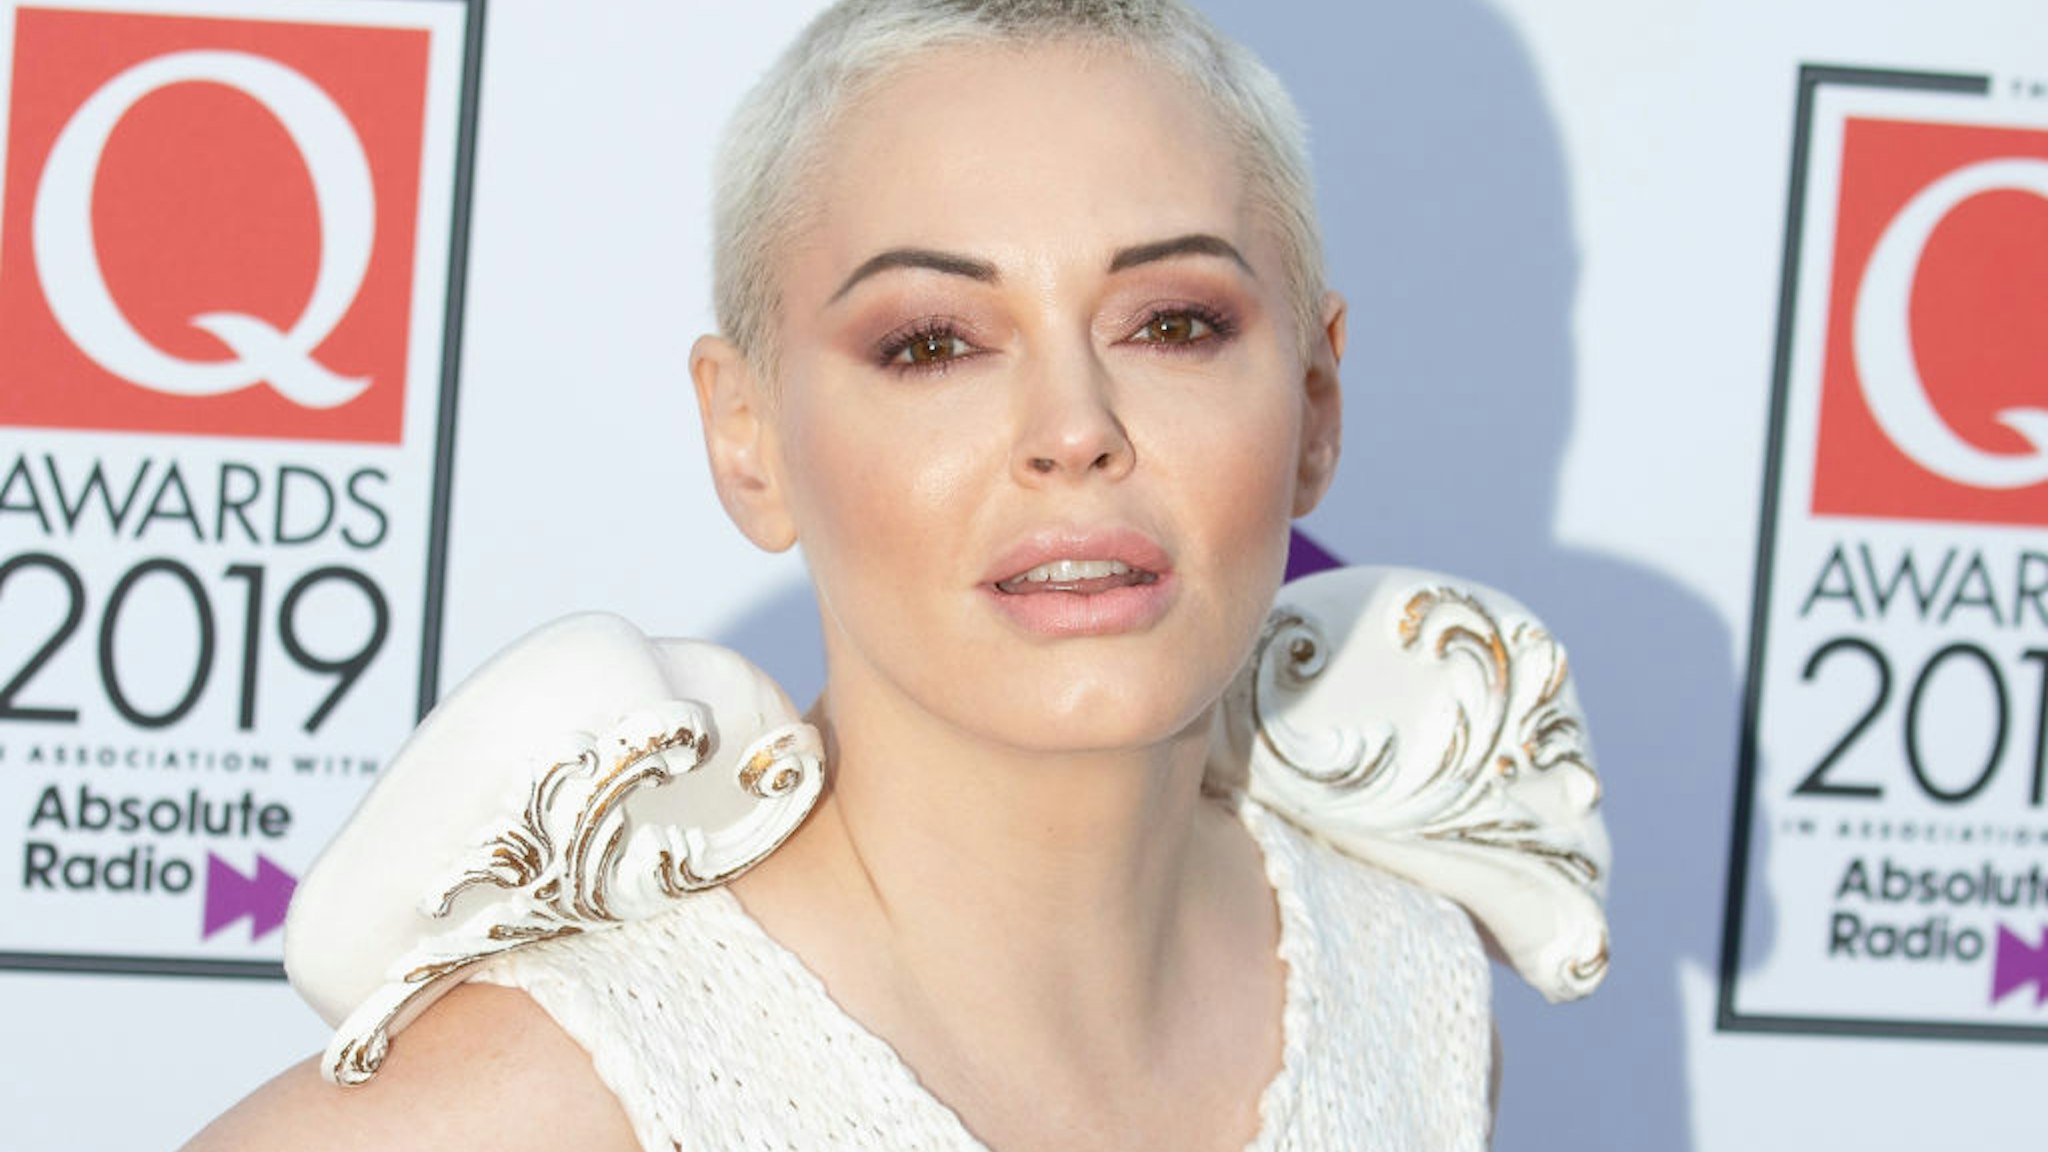 Rose McGowan attends the Q Awards 2019 at The Roundhouse on October 16, 2019 in London, England.